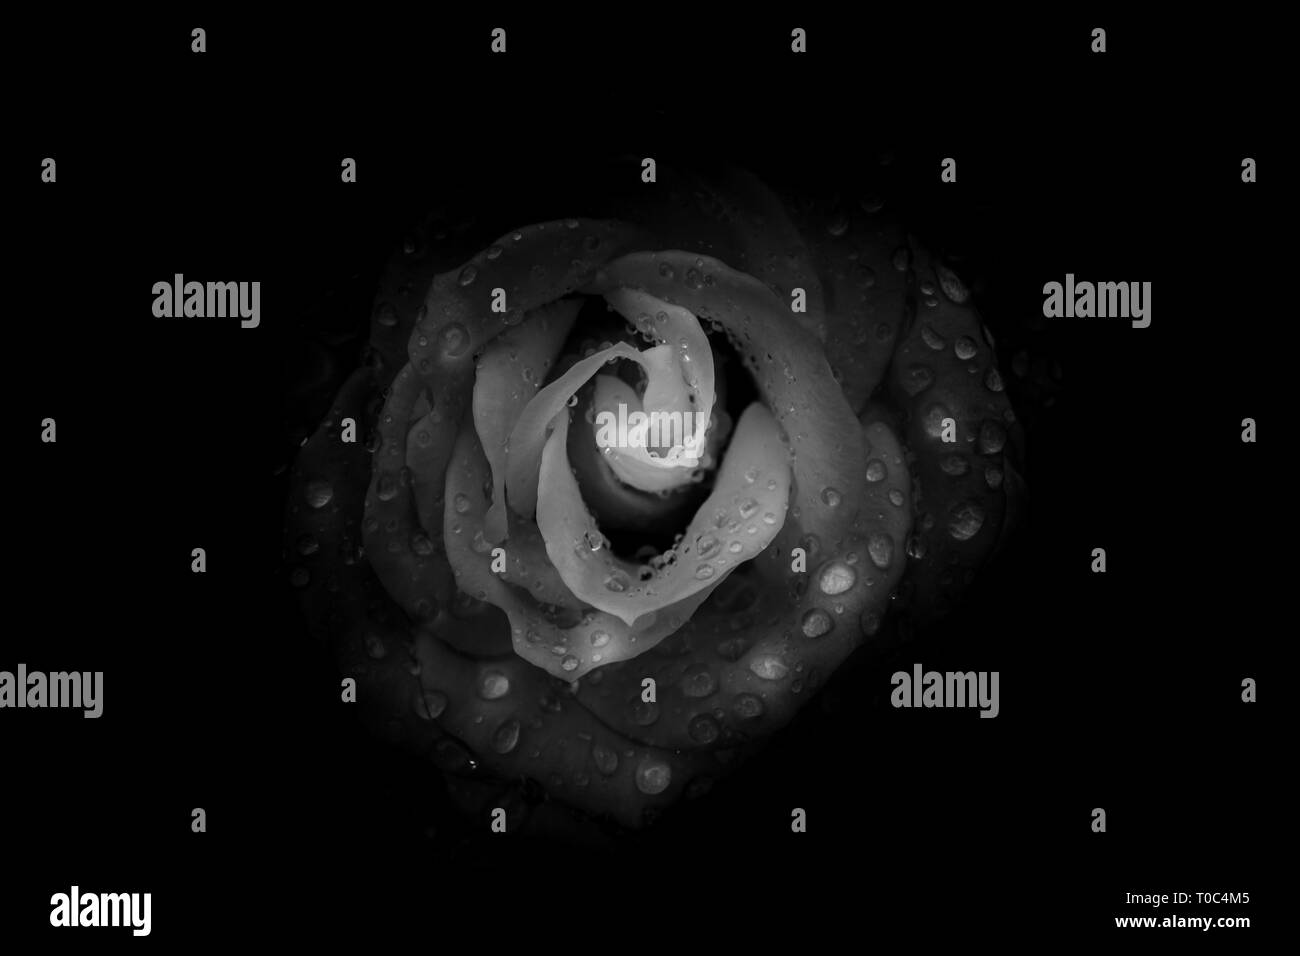 Beautiful Single Rose with Waterdrops on Black Background, Black and White style Stock Photo